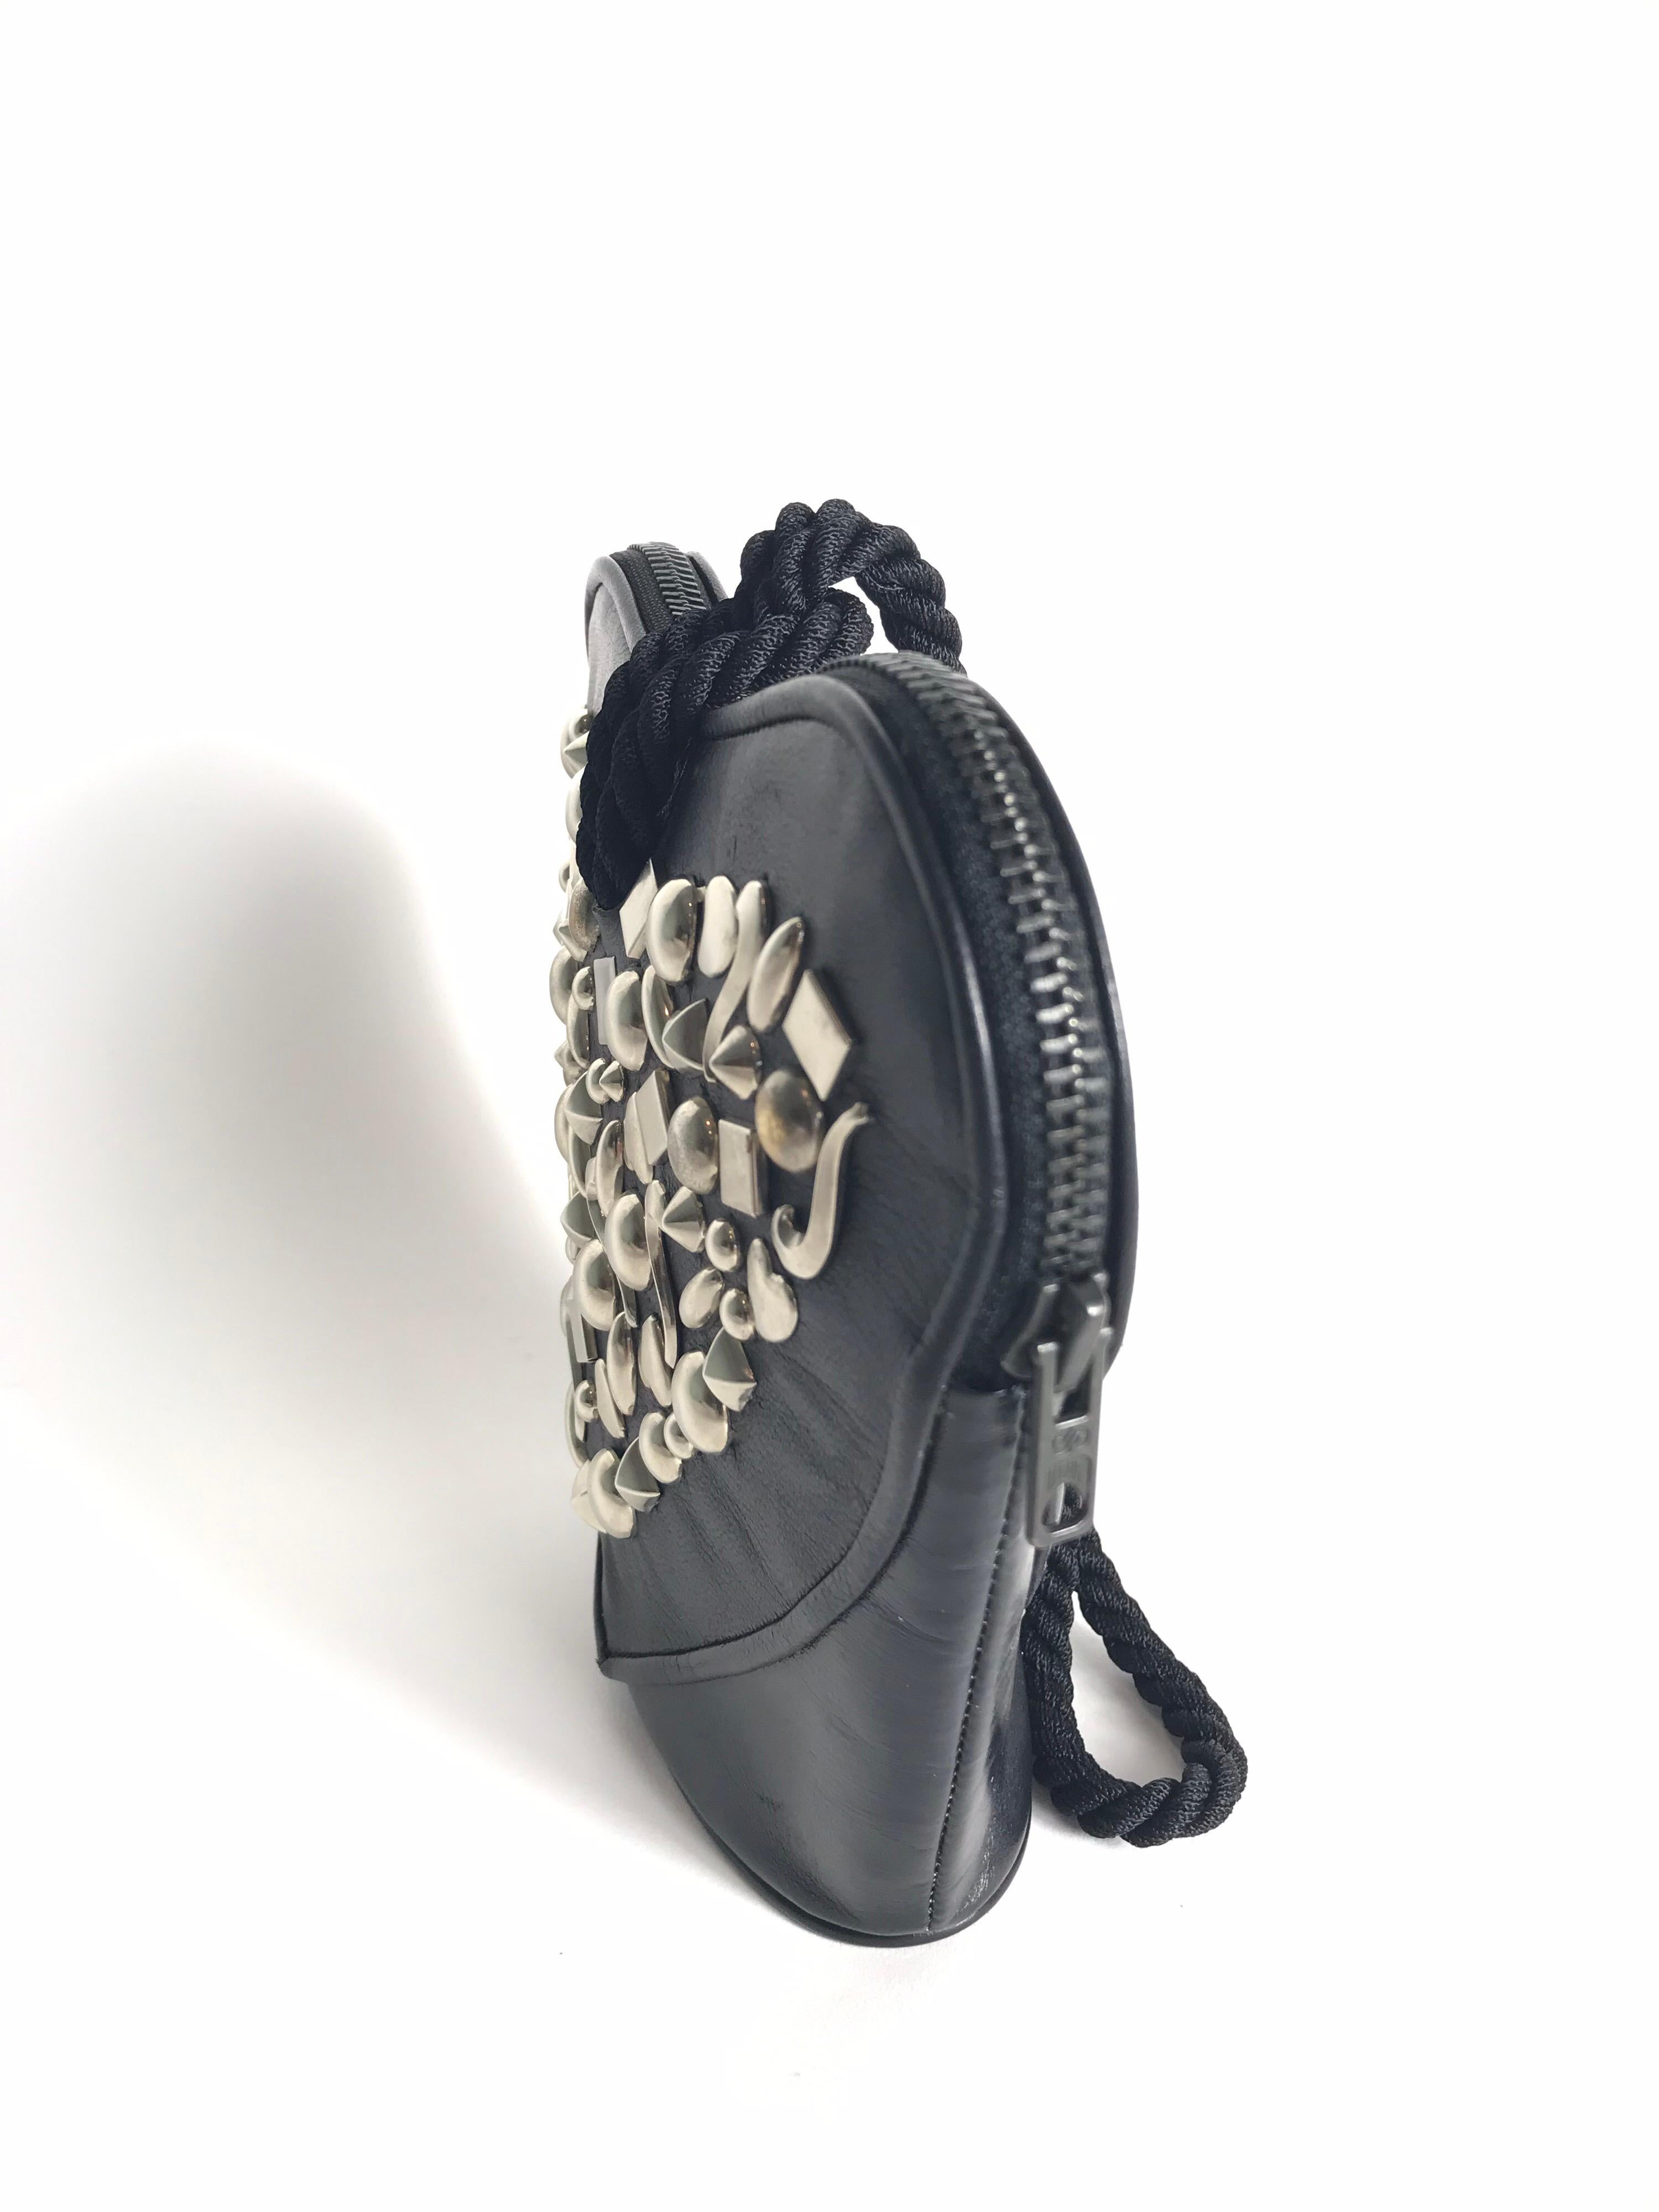 RENAUD PELLEGRINO black leather heart shaped studded small bag with cord strap. Condition: Excellent 